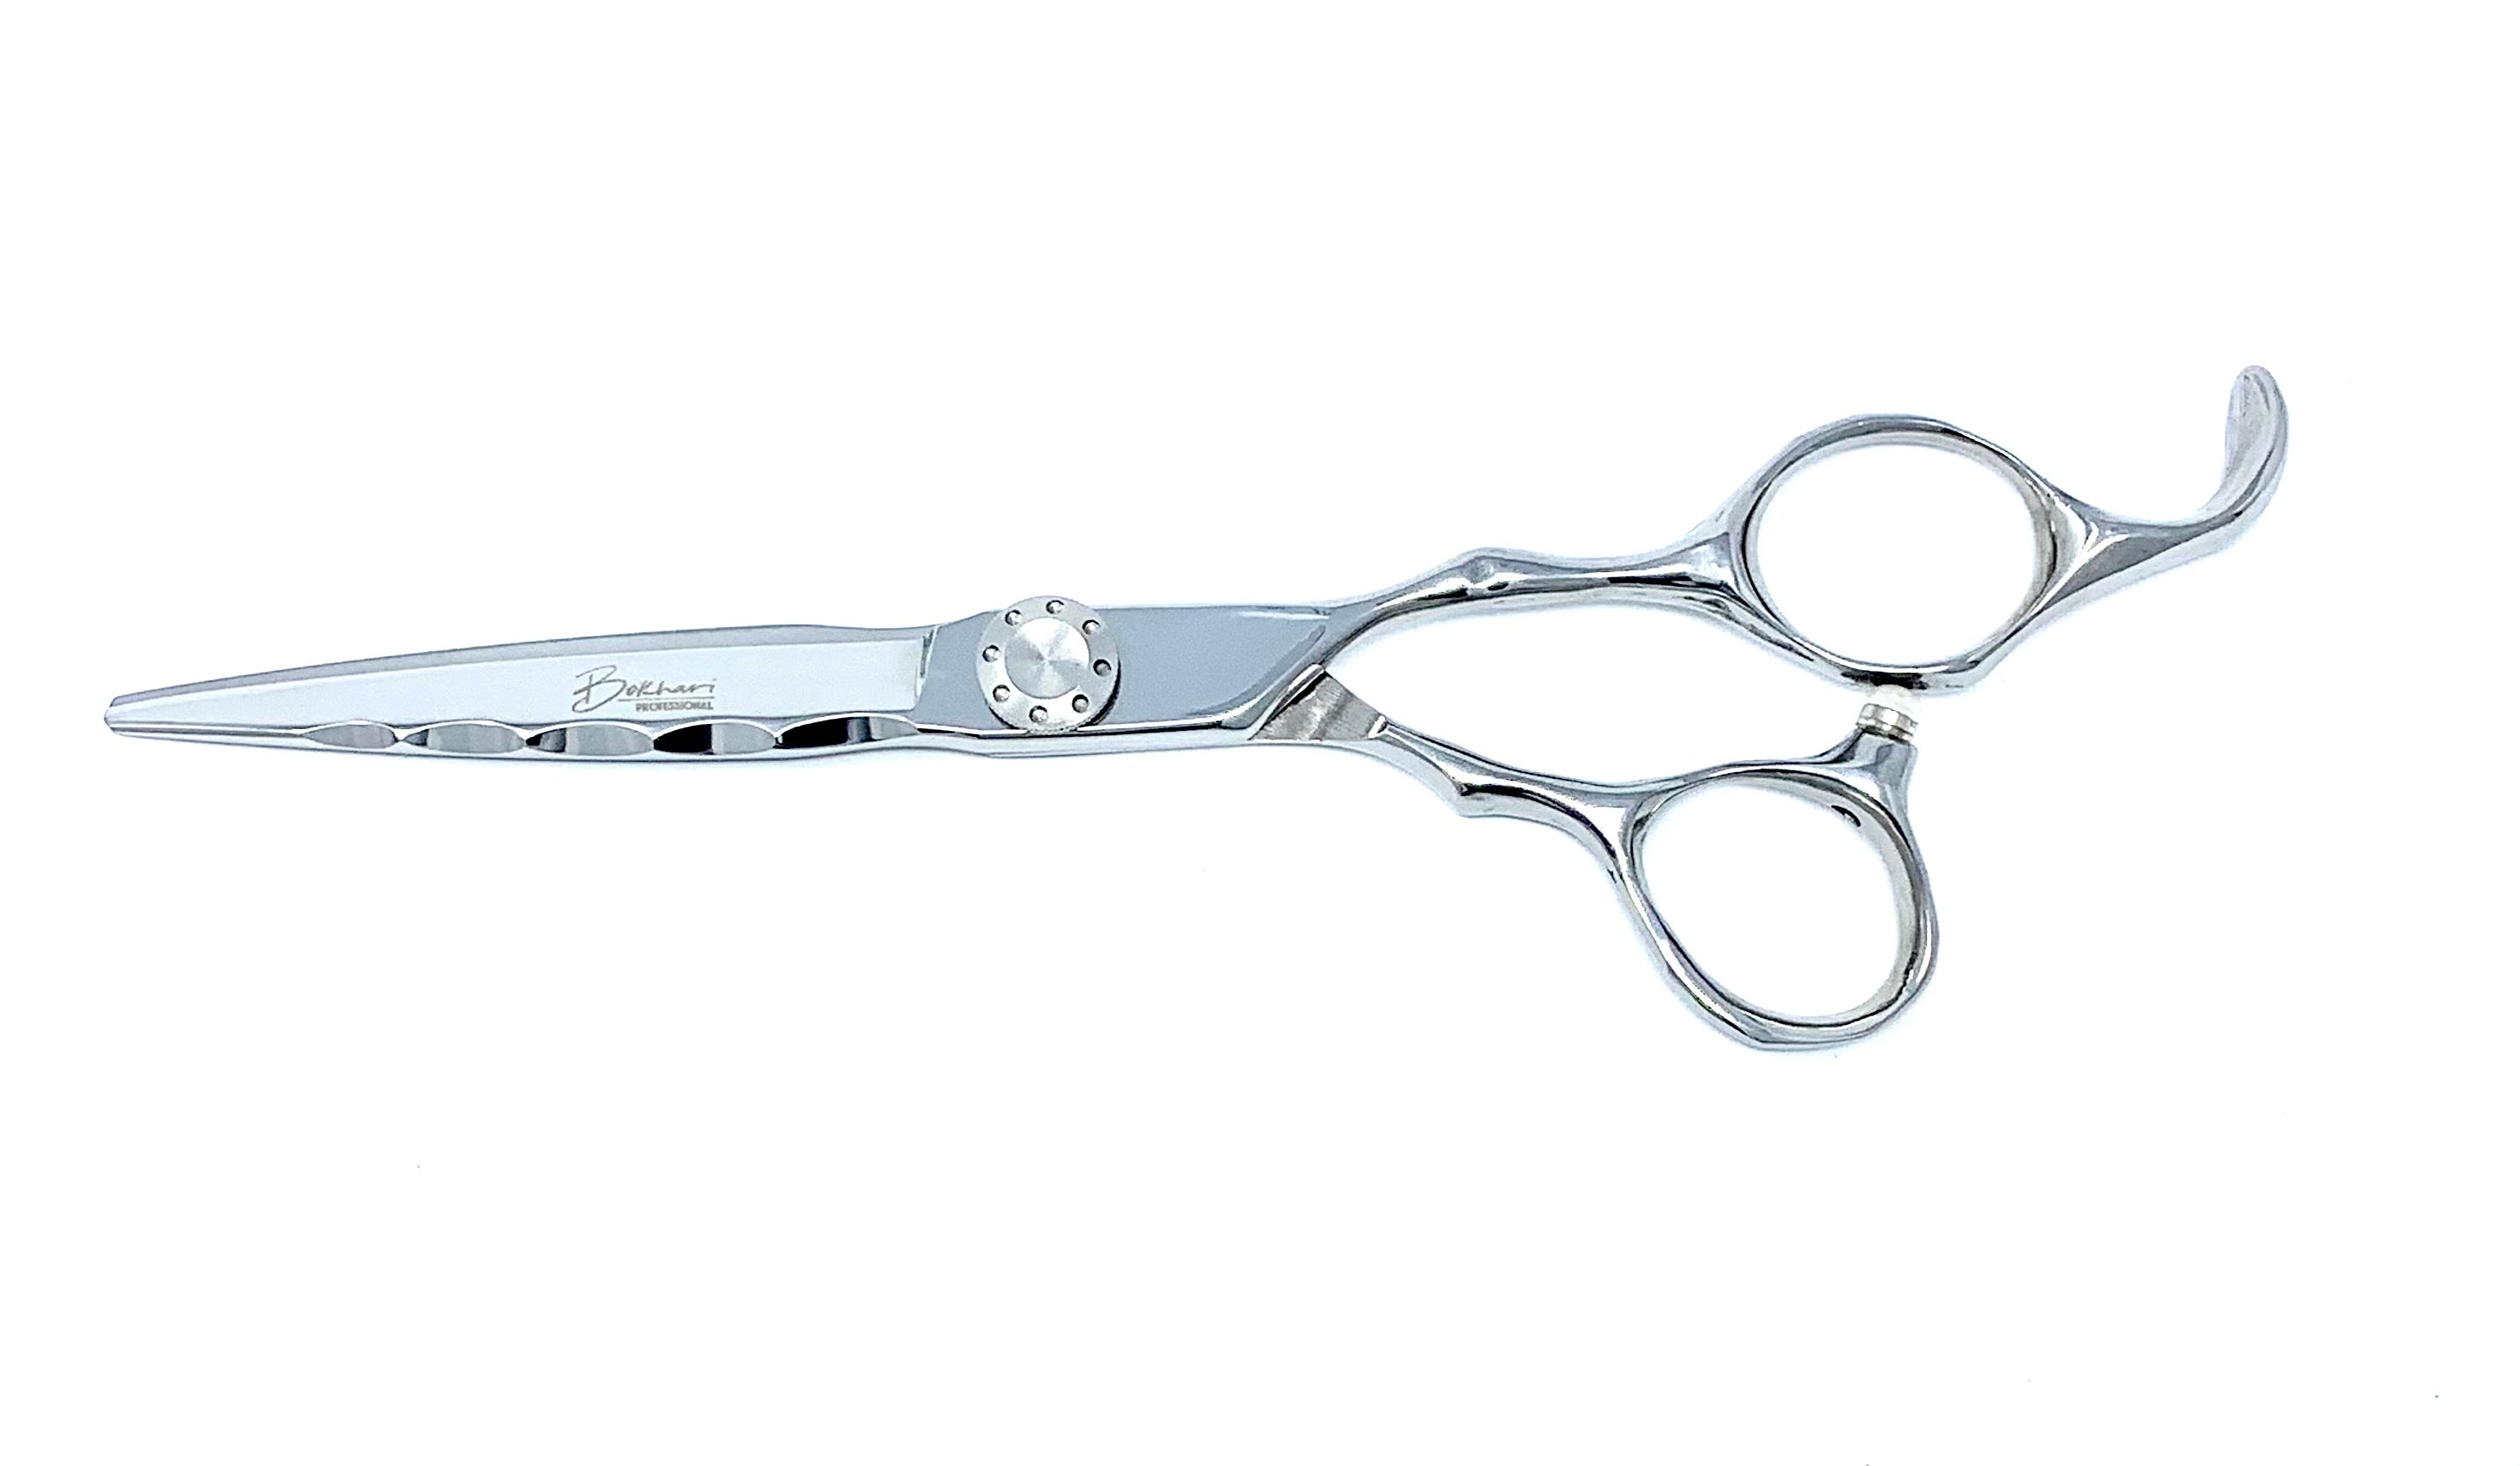 Silver Star Professional Barber Scissors – Le Kare Beauty Supply